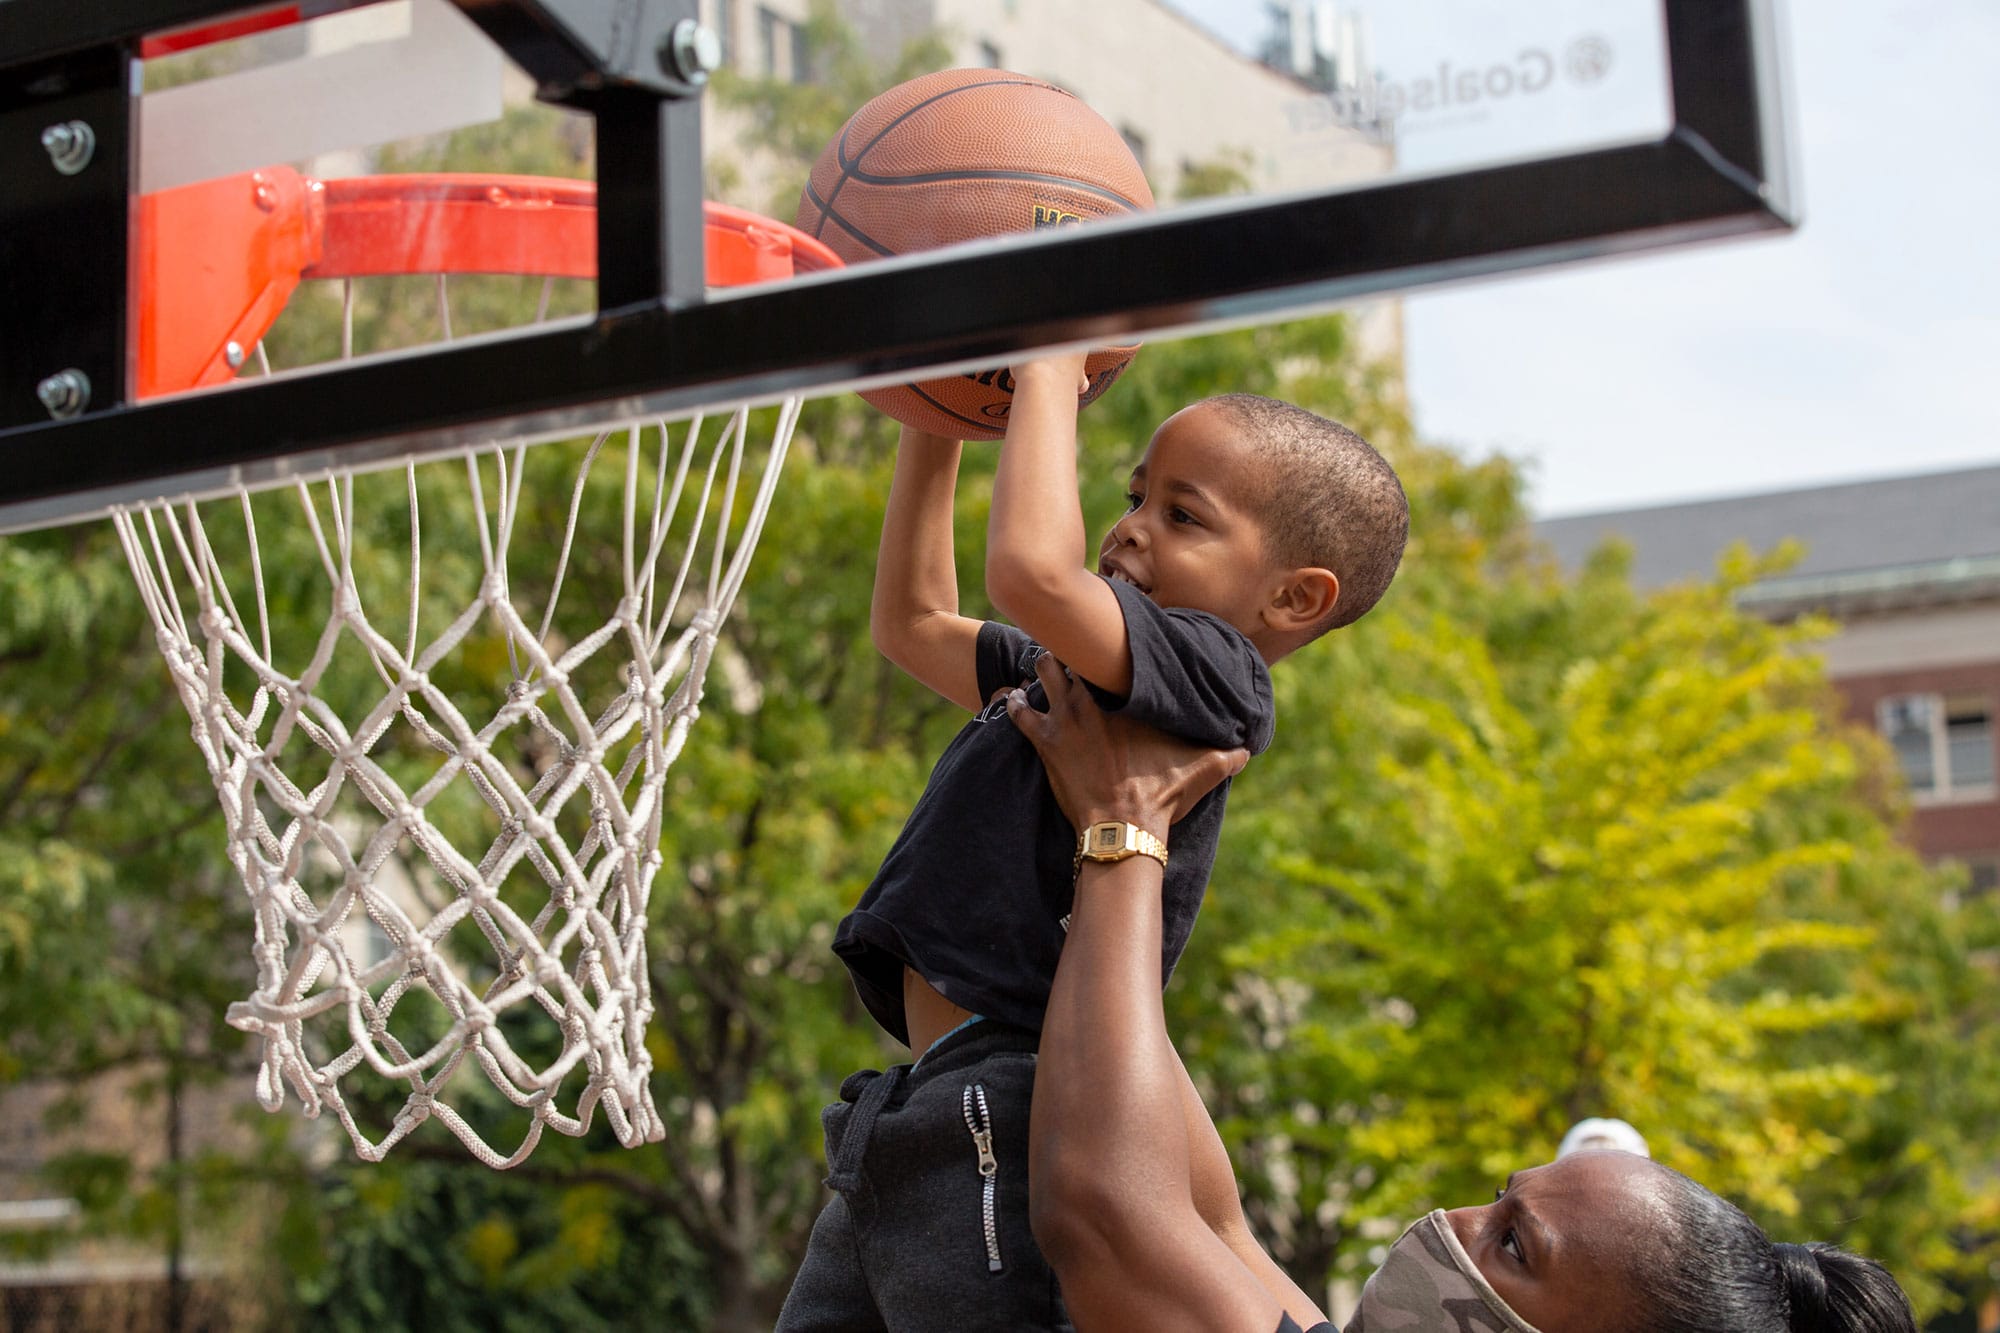 A young boy dunks a basketball in a park.